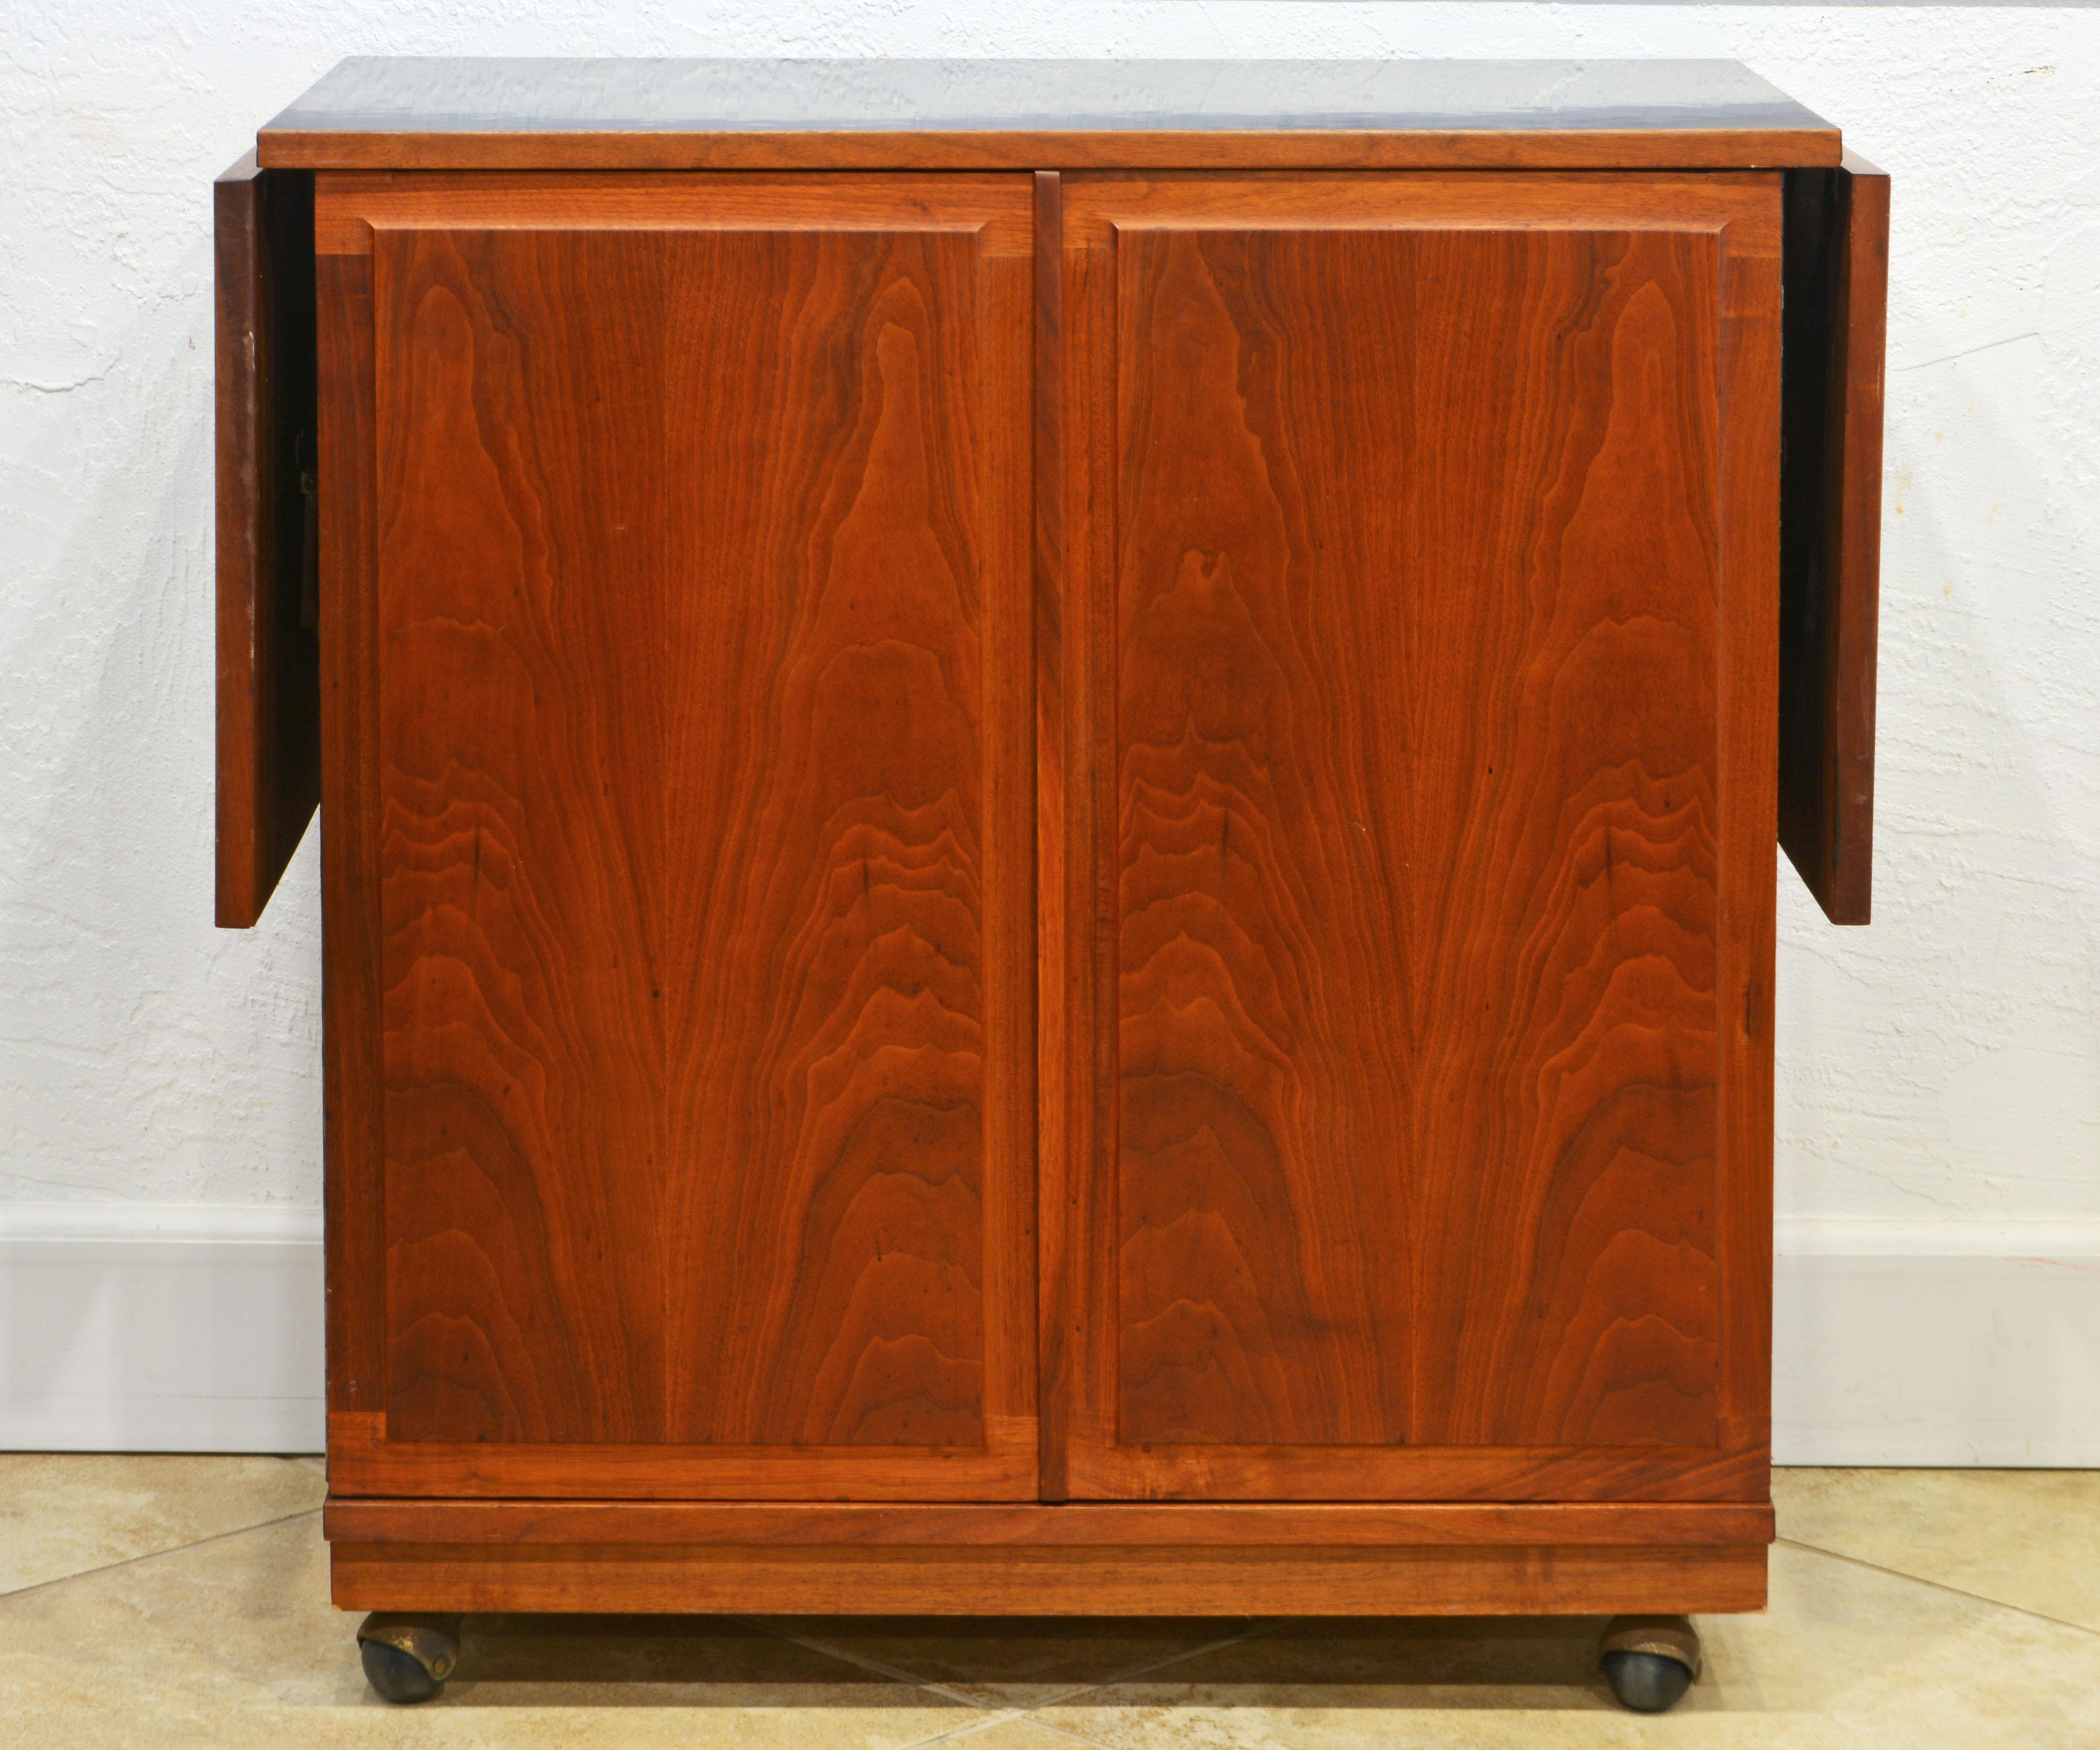 This Mid-Century Modern walnut bar cart and cabinet features a wood edged black laminate top and drop leaves, two paneled figured walnut doors on piano hinges and with an innovative opening grip all in wood resting on wheels partly concealed by a